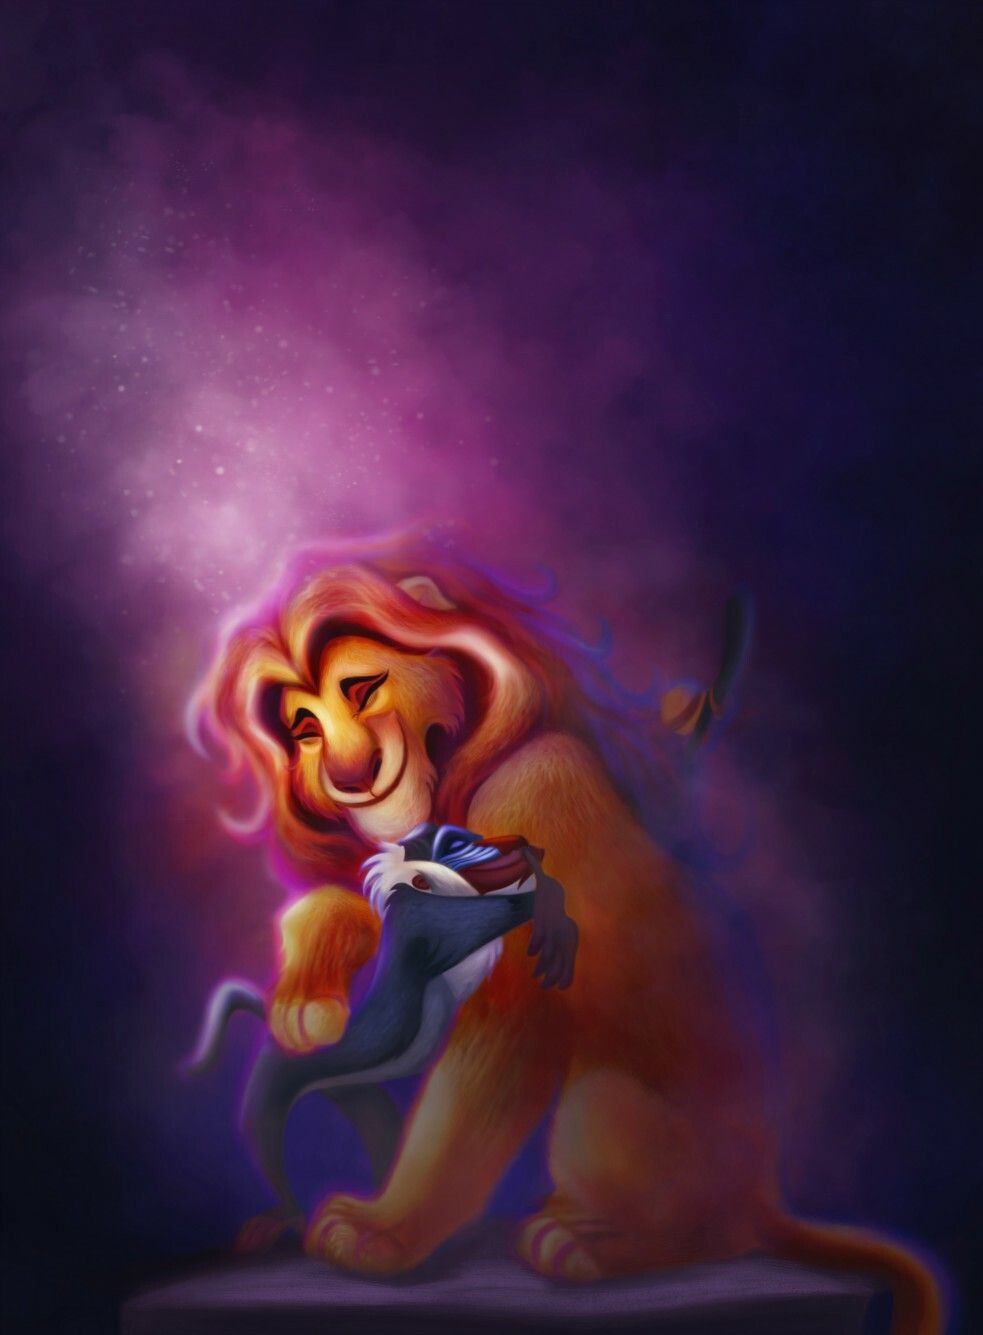 A fanart of Mufasa and his son, Simba, from the movie The Lion King. - The Lion King